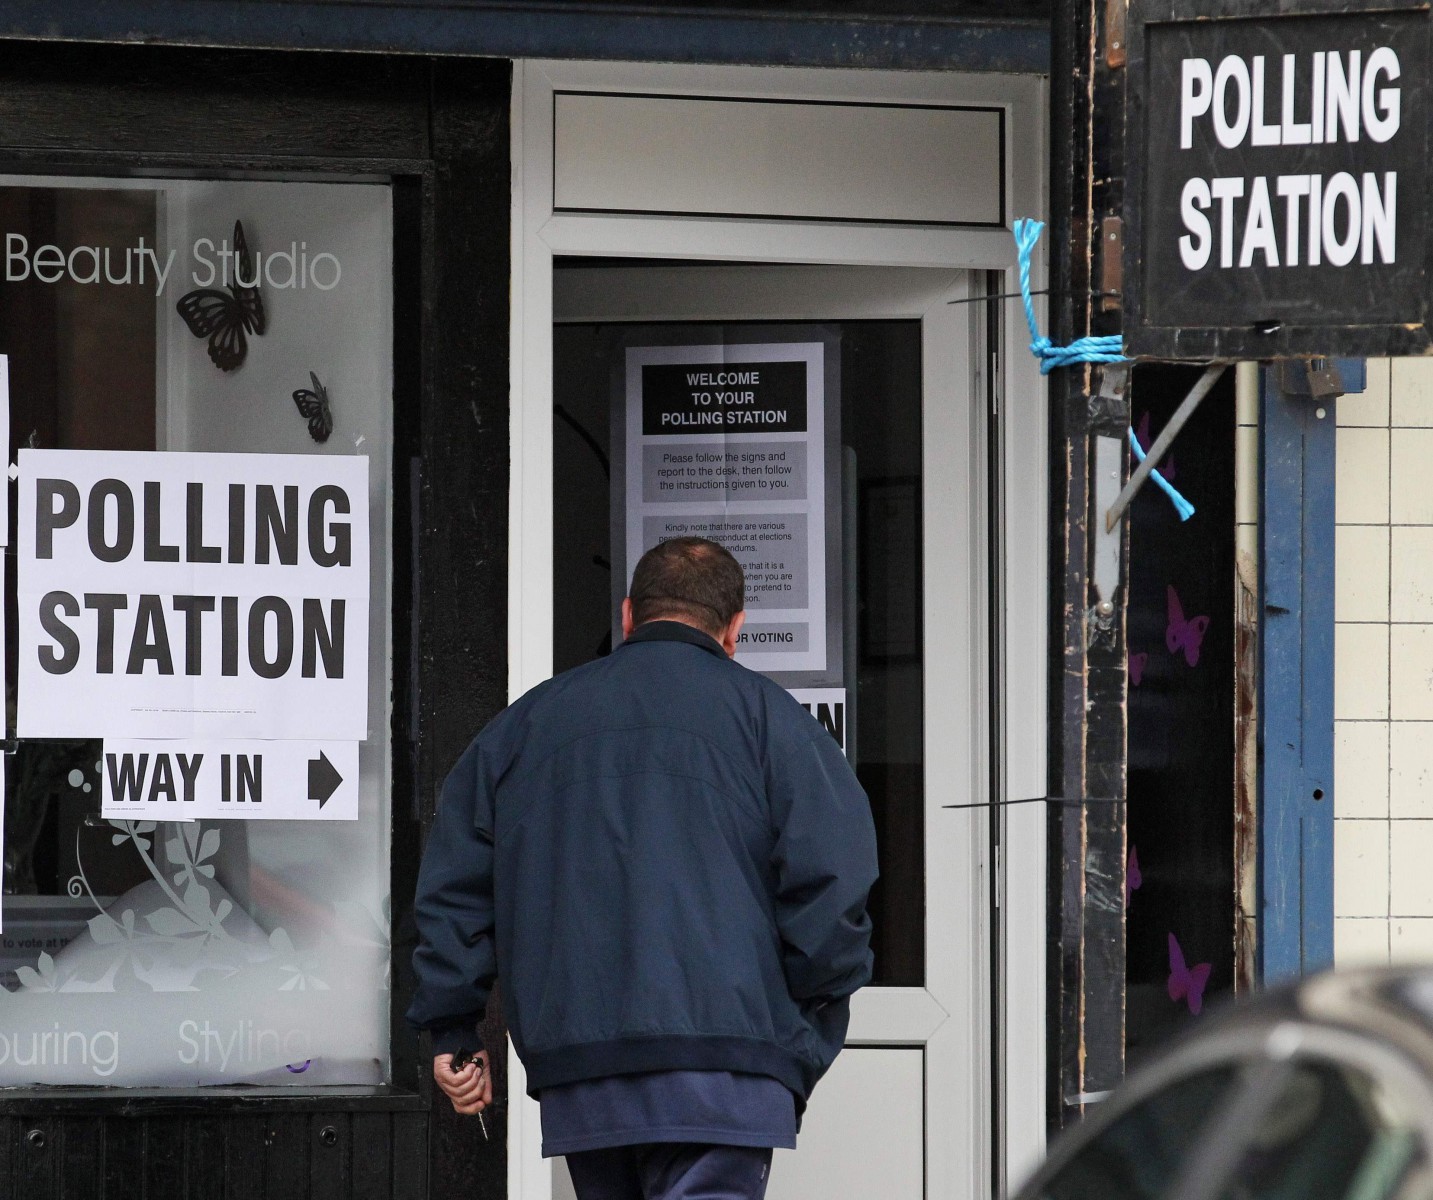 You need to take ID to vote in Northern Ireland